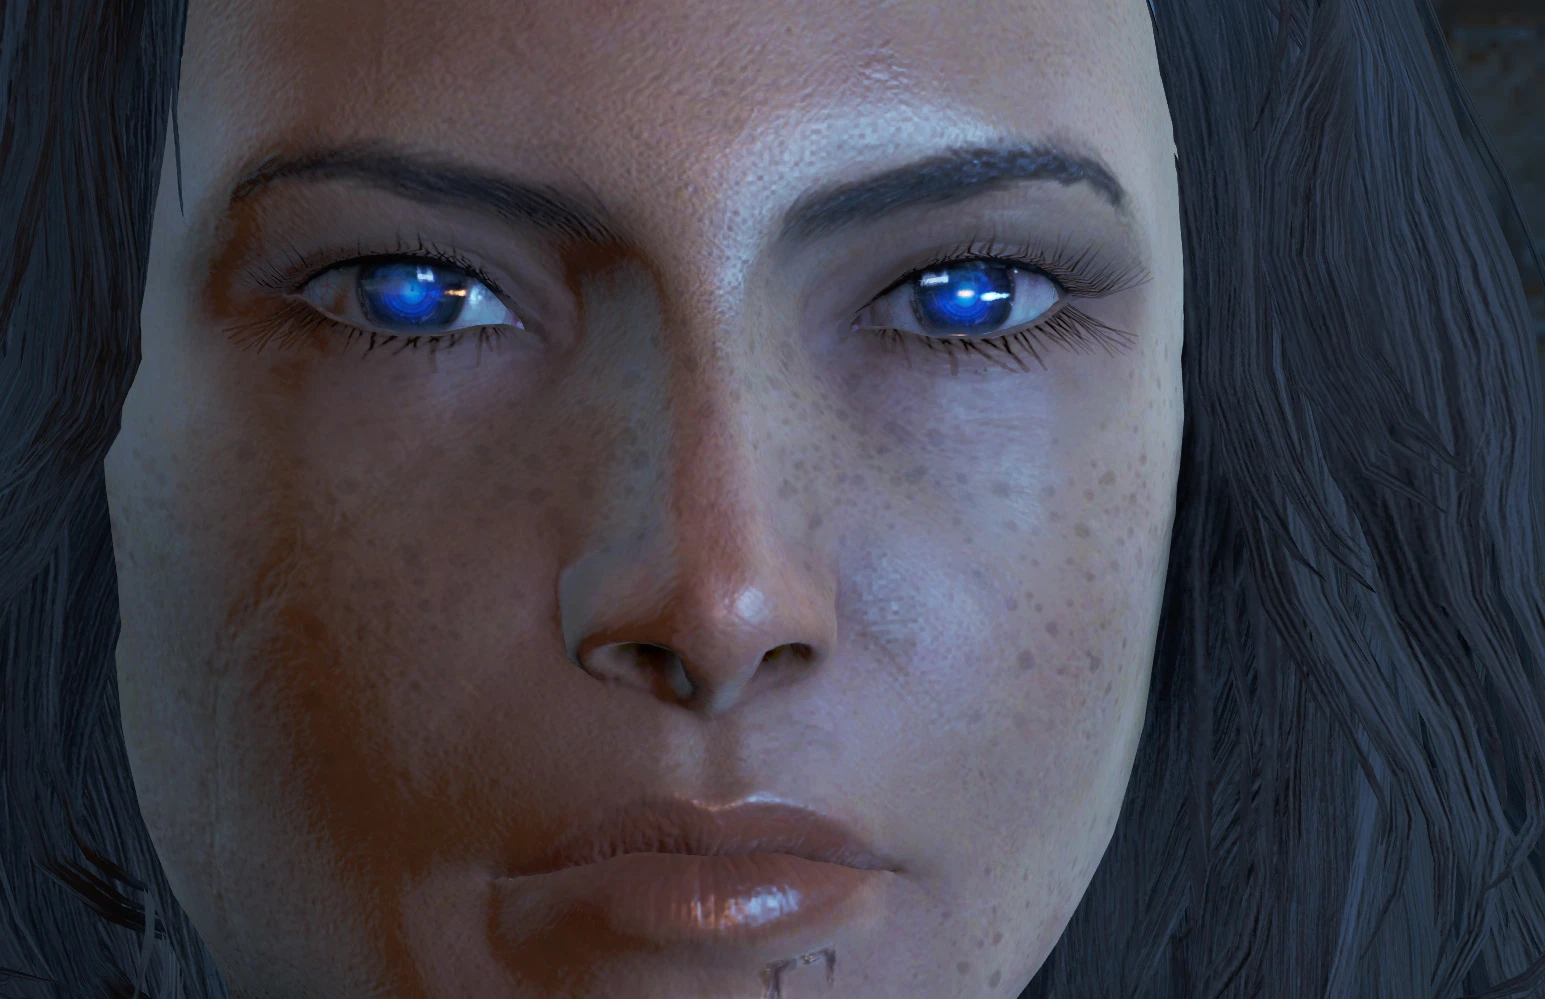 The eyes of beauty fallout 4 (120) фото